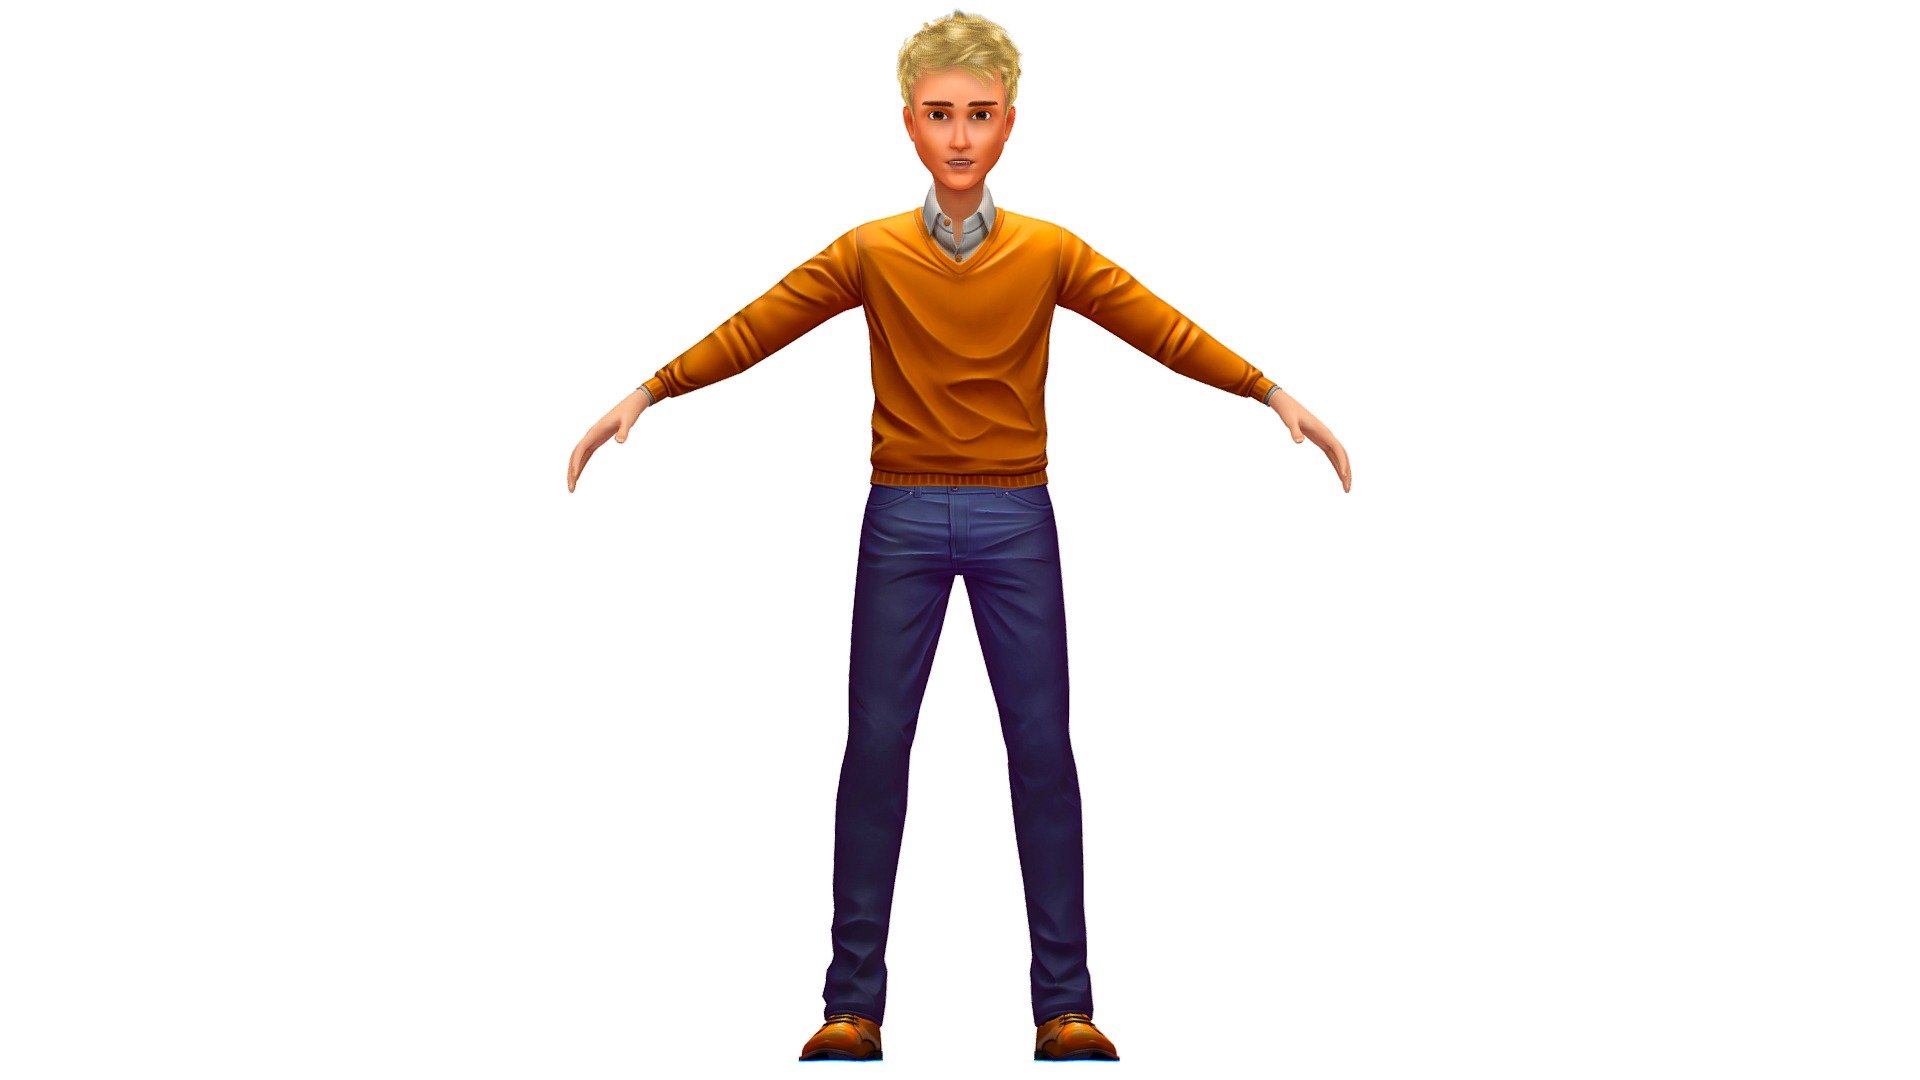 you can combine and match othercombinations using the collection:

hair collection - https://skfb.ly/ovqTn

clotch collection - https://skfb.ly/ovqT7

lowpoly avatar collection - https://skfb.ly/ovqTu - Cartoon Low Poly Style Avatar 003 - Buy Royalty Free 3D model by Oleg Shuldiakov (@olegshuldiakov) 3d model